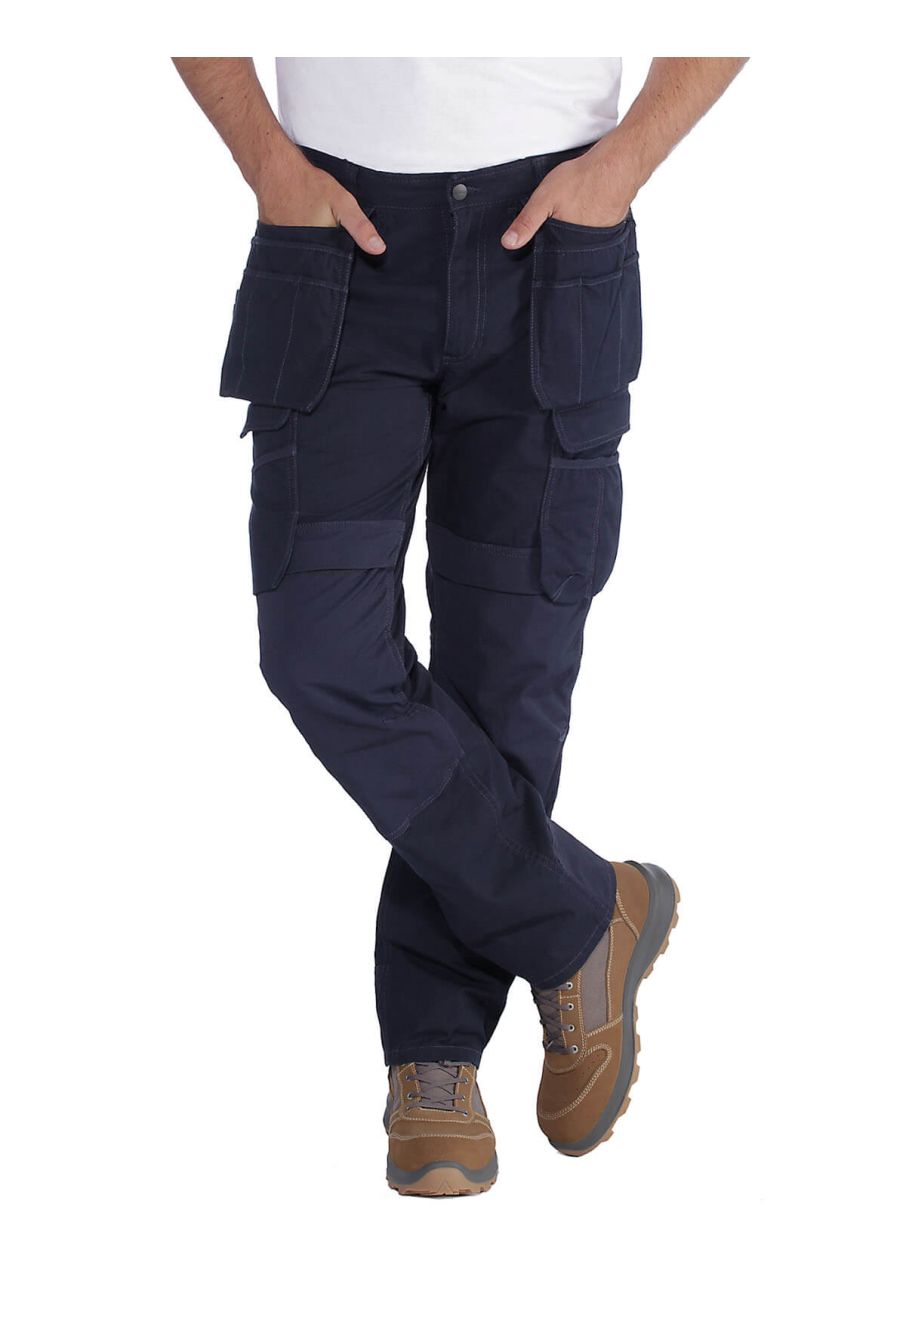 Men's Cotton Ripstop Relaxed Fit Double-Front Cargo Work Pant - Jeans/Pants  & Shorts, Carhartt